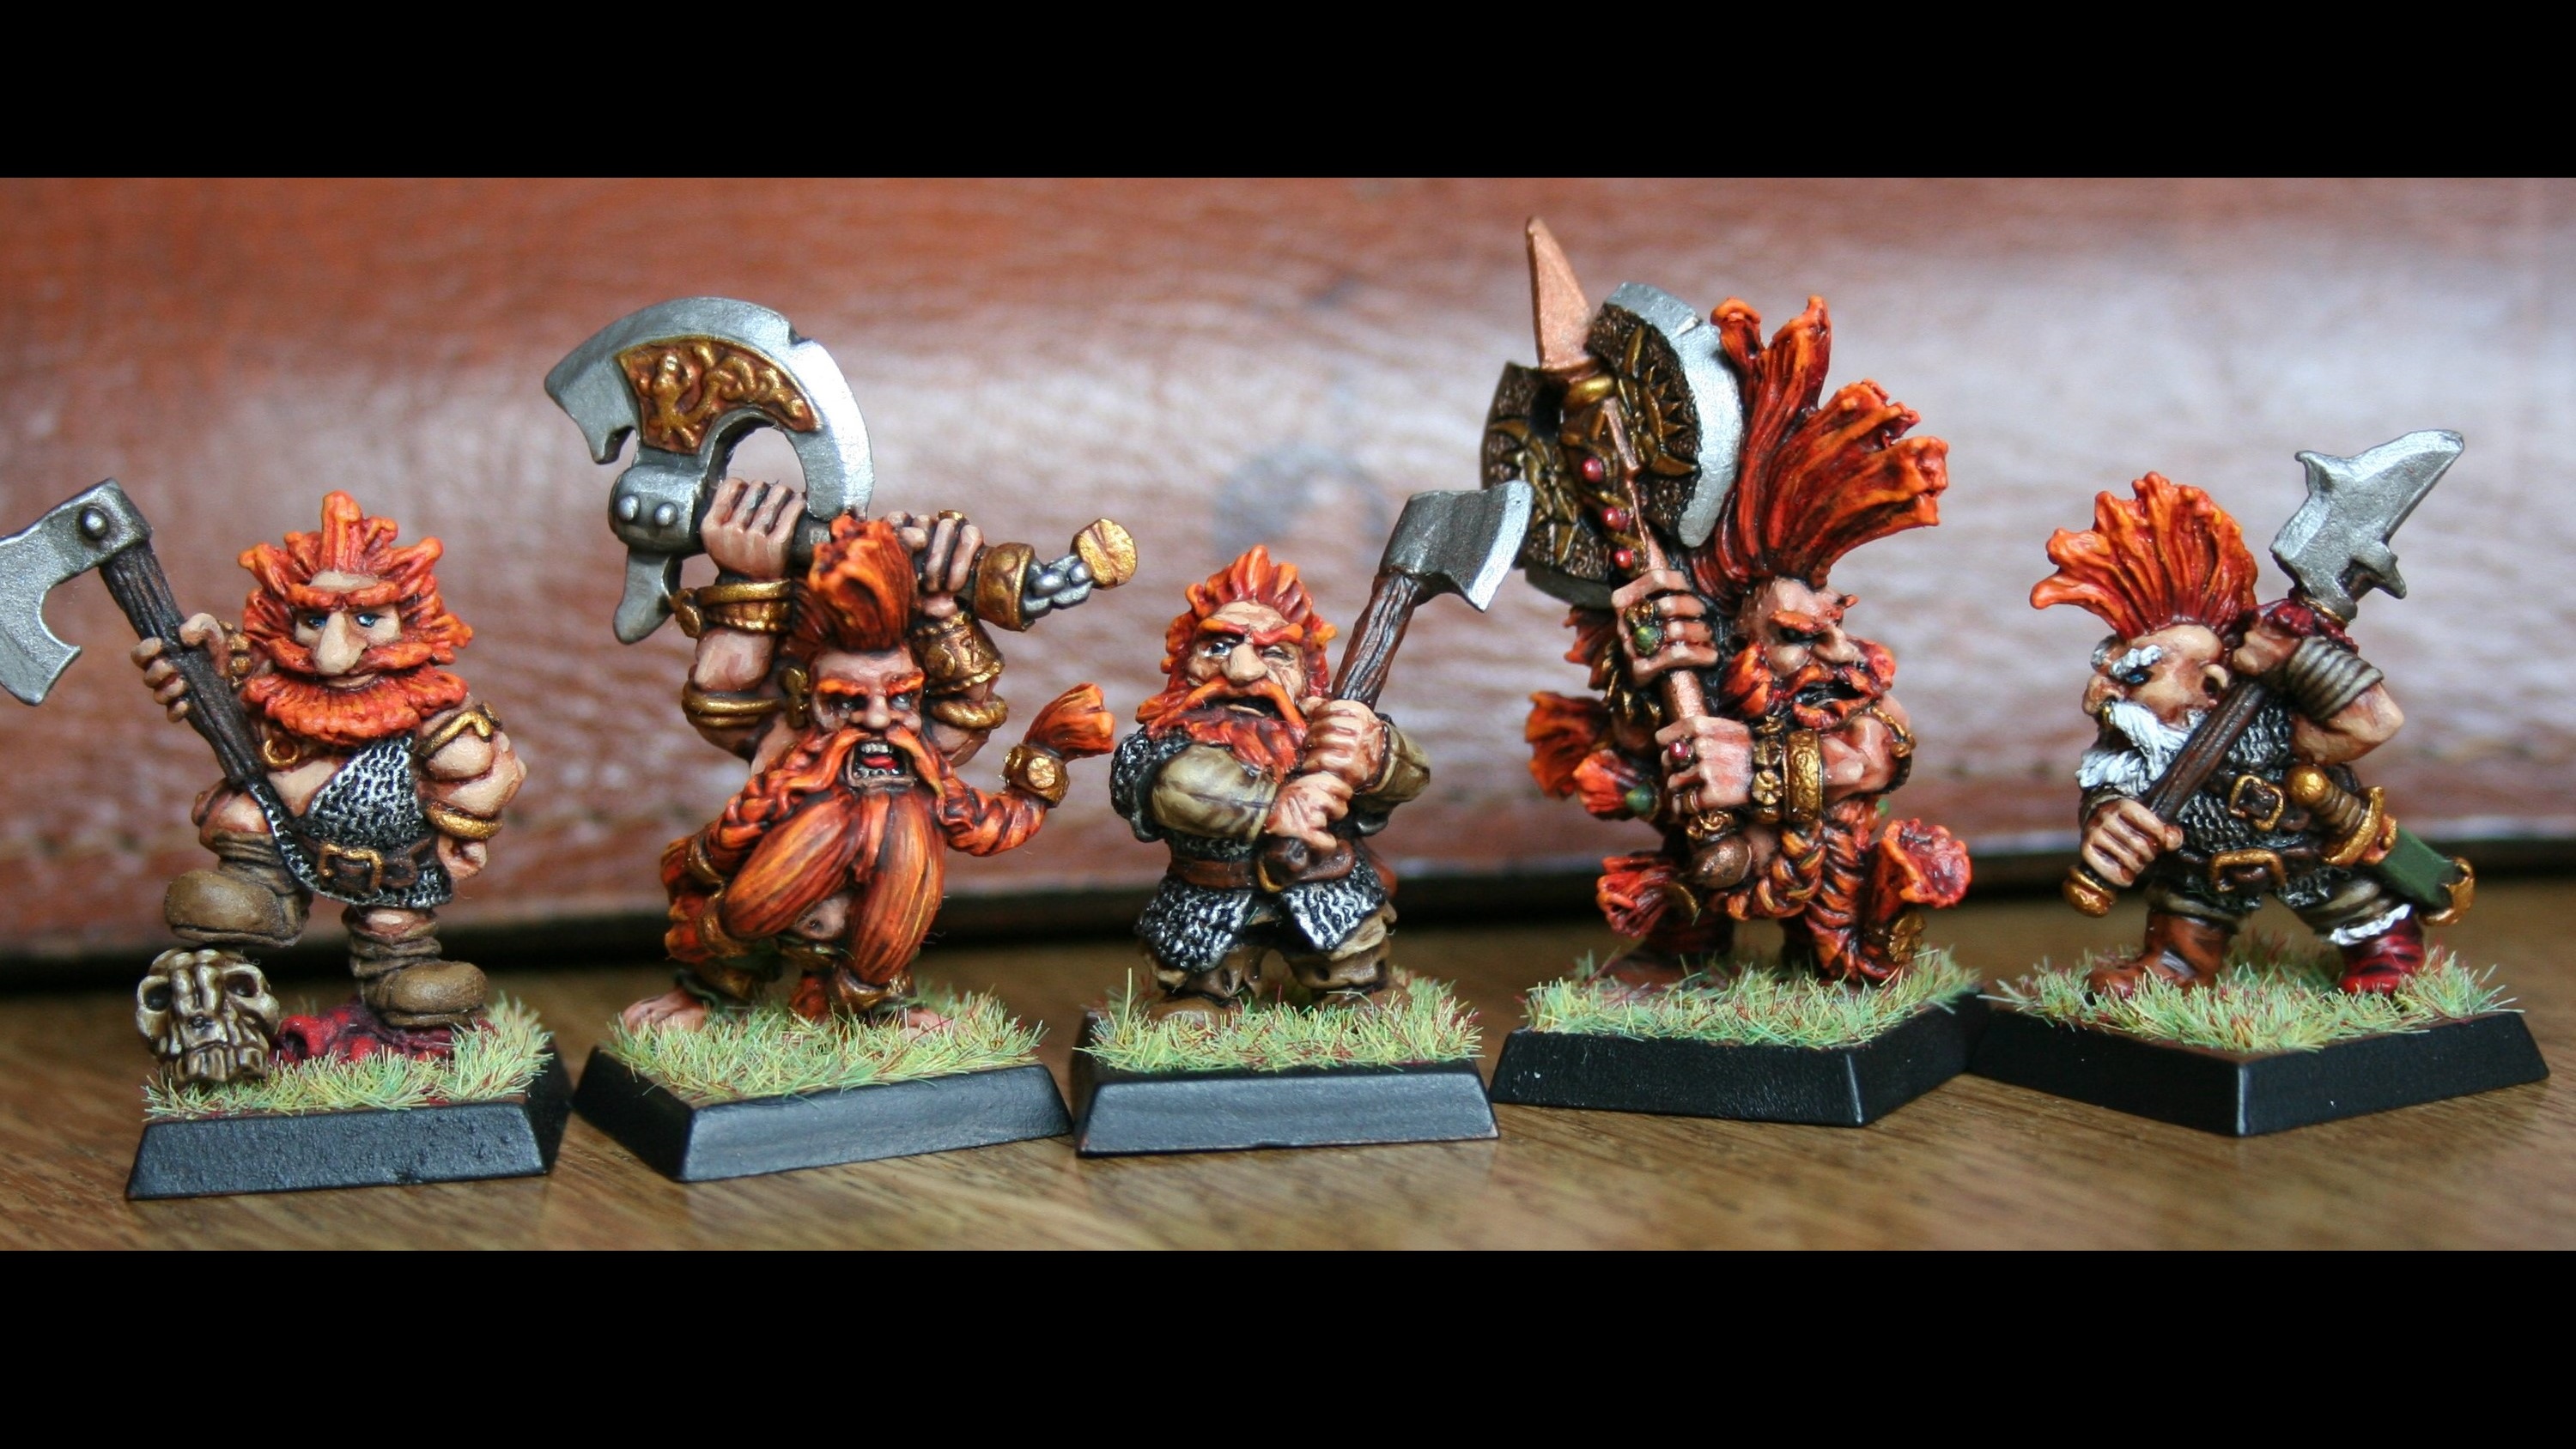 A Band of Slayers - Old World Adventurers